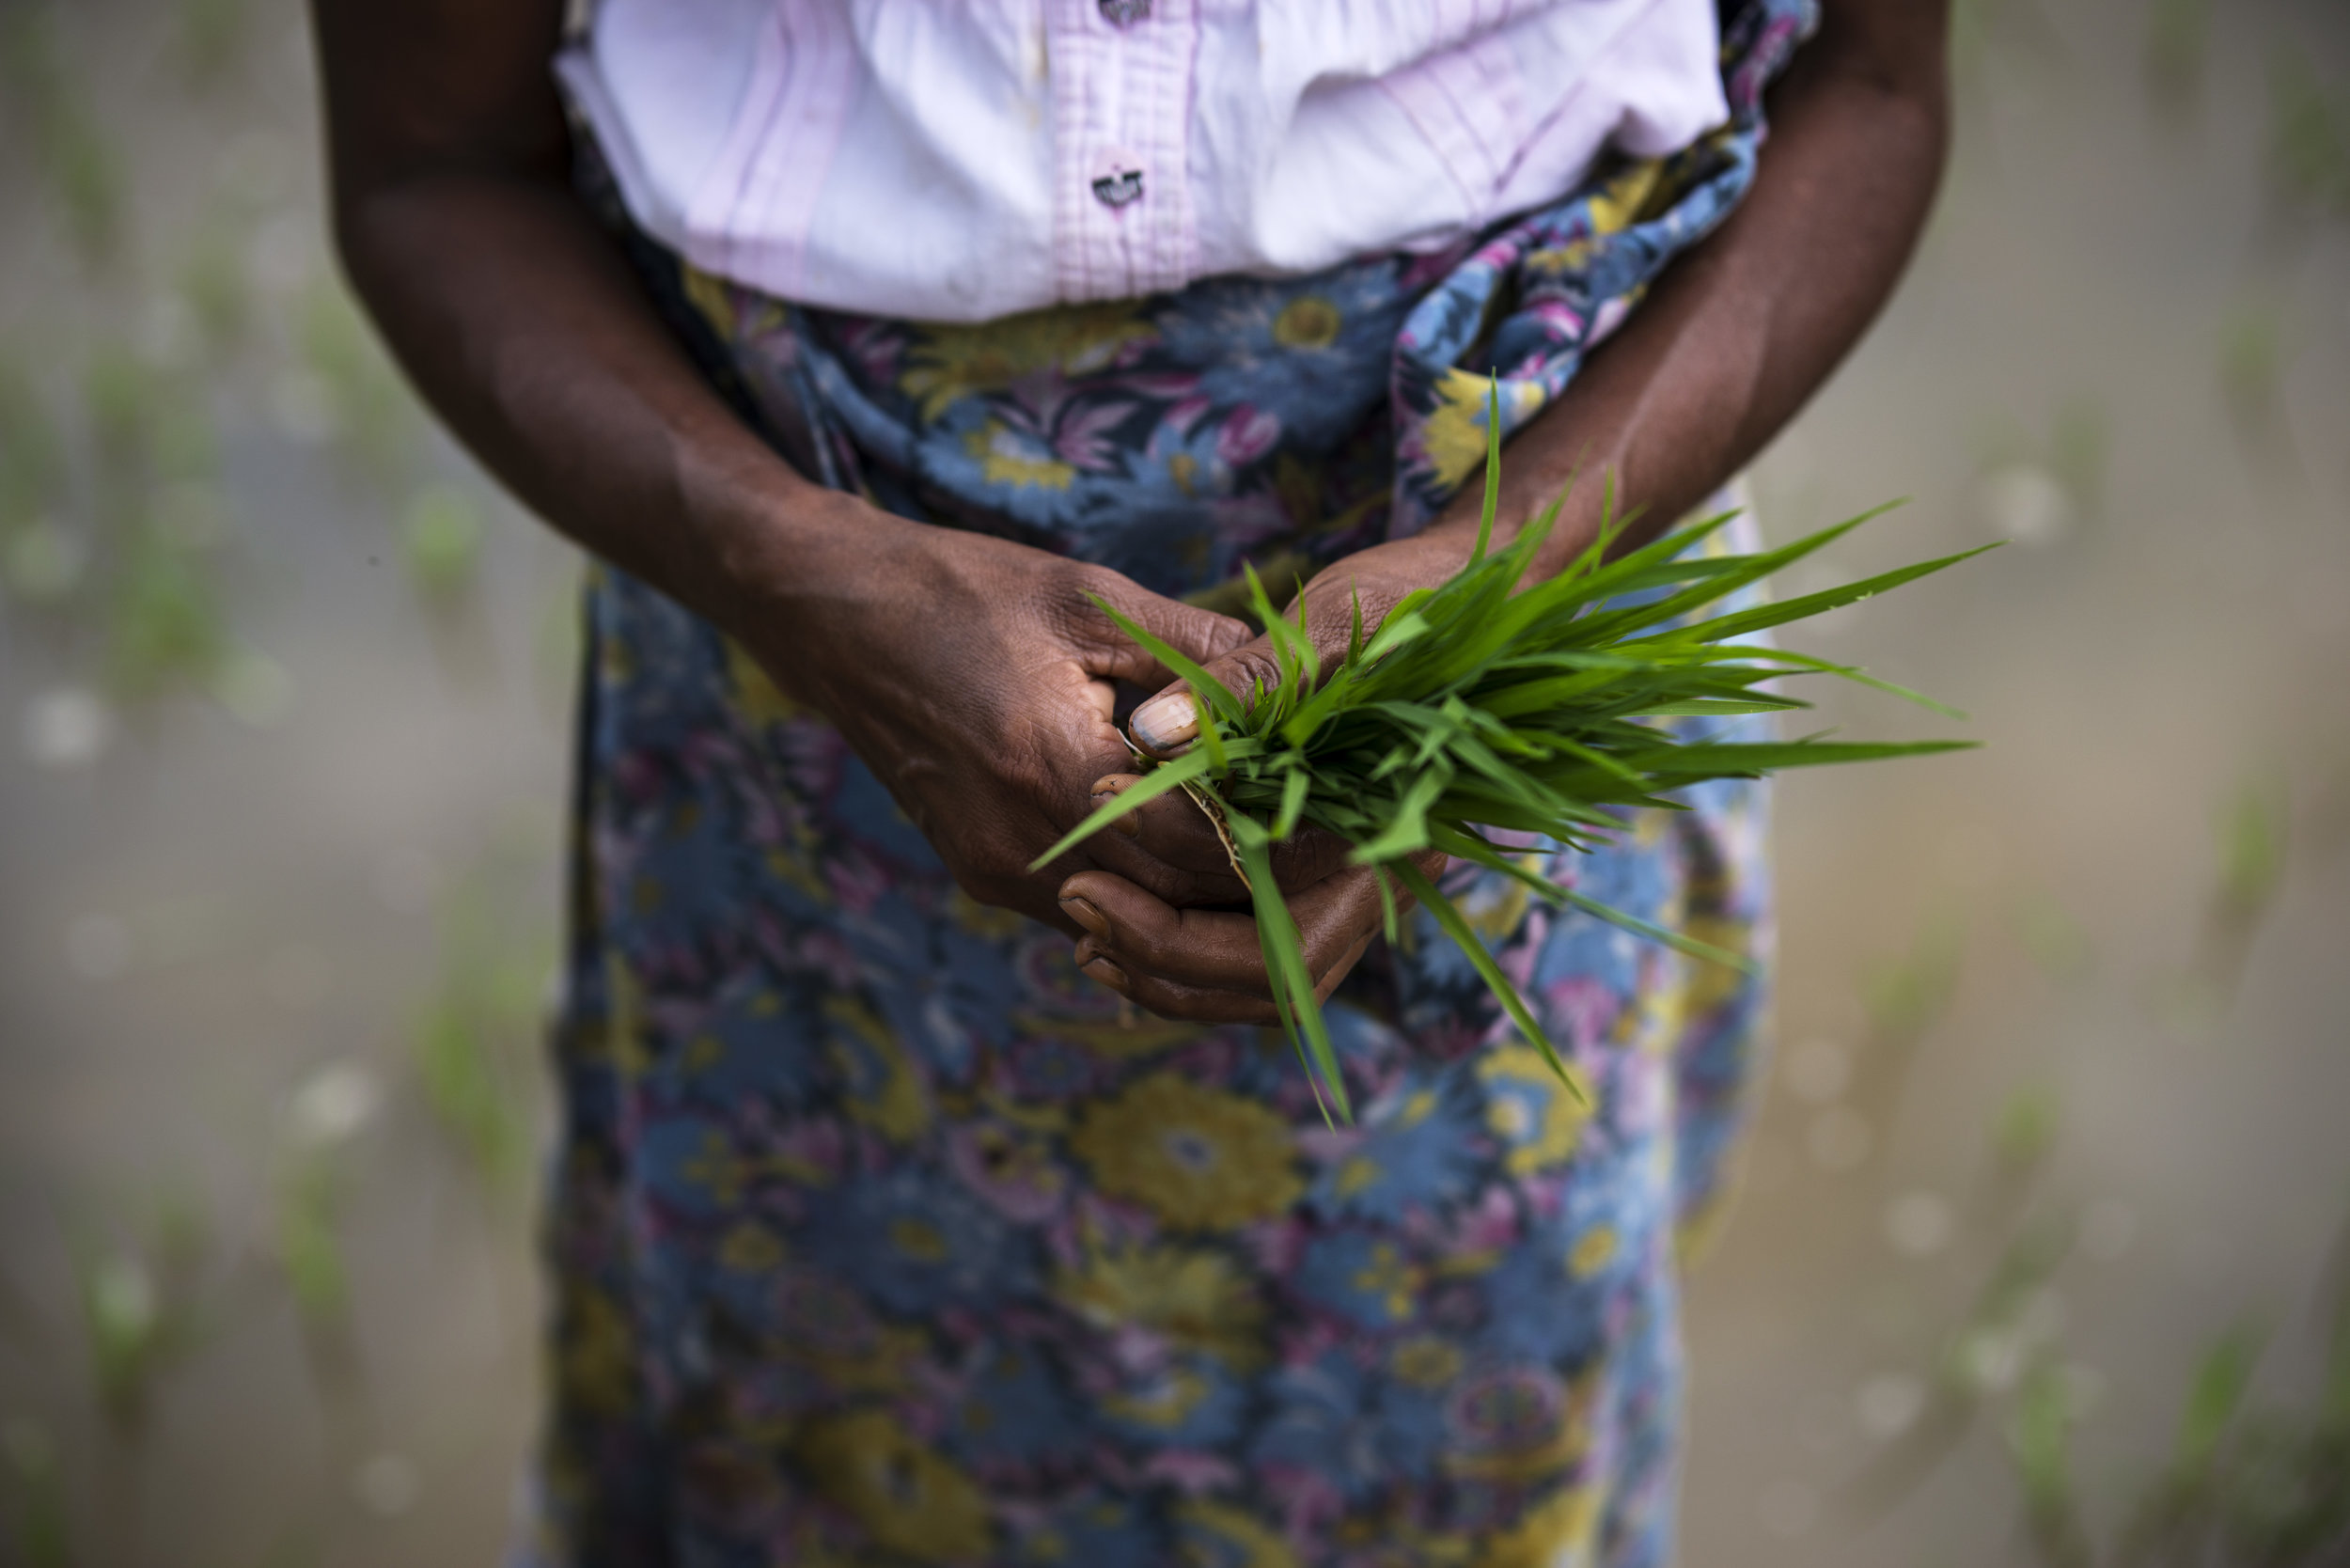  Each rice seedling must be planted and re-planted by hand, approximately 12 cm apart, to prevent weed interference on the terrace. While this helps the crop flourish, it also requires more labor. 